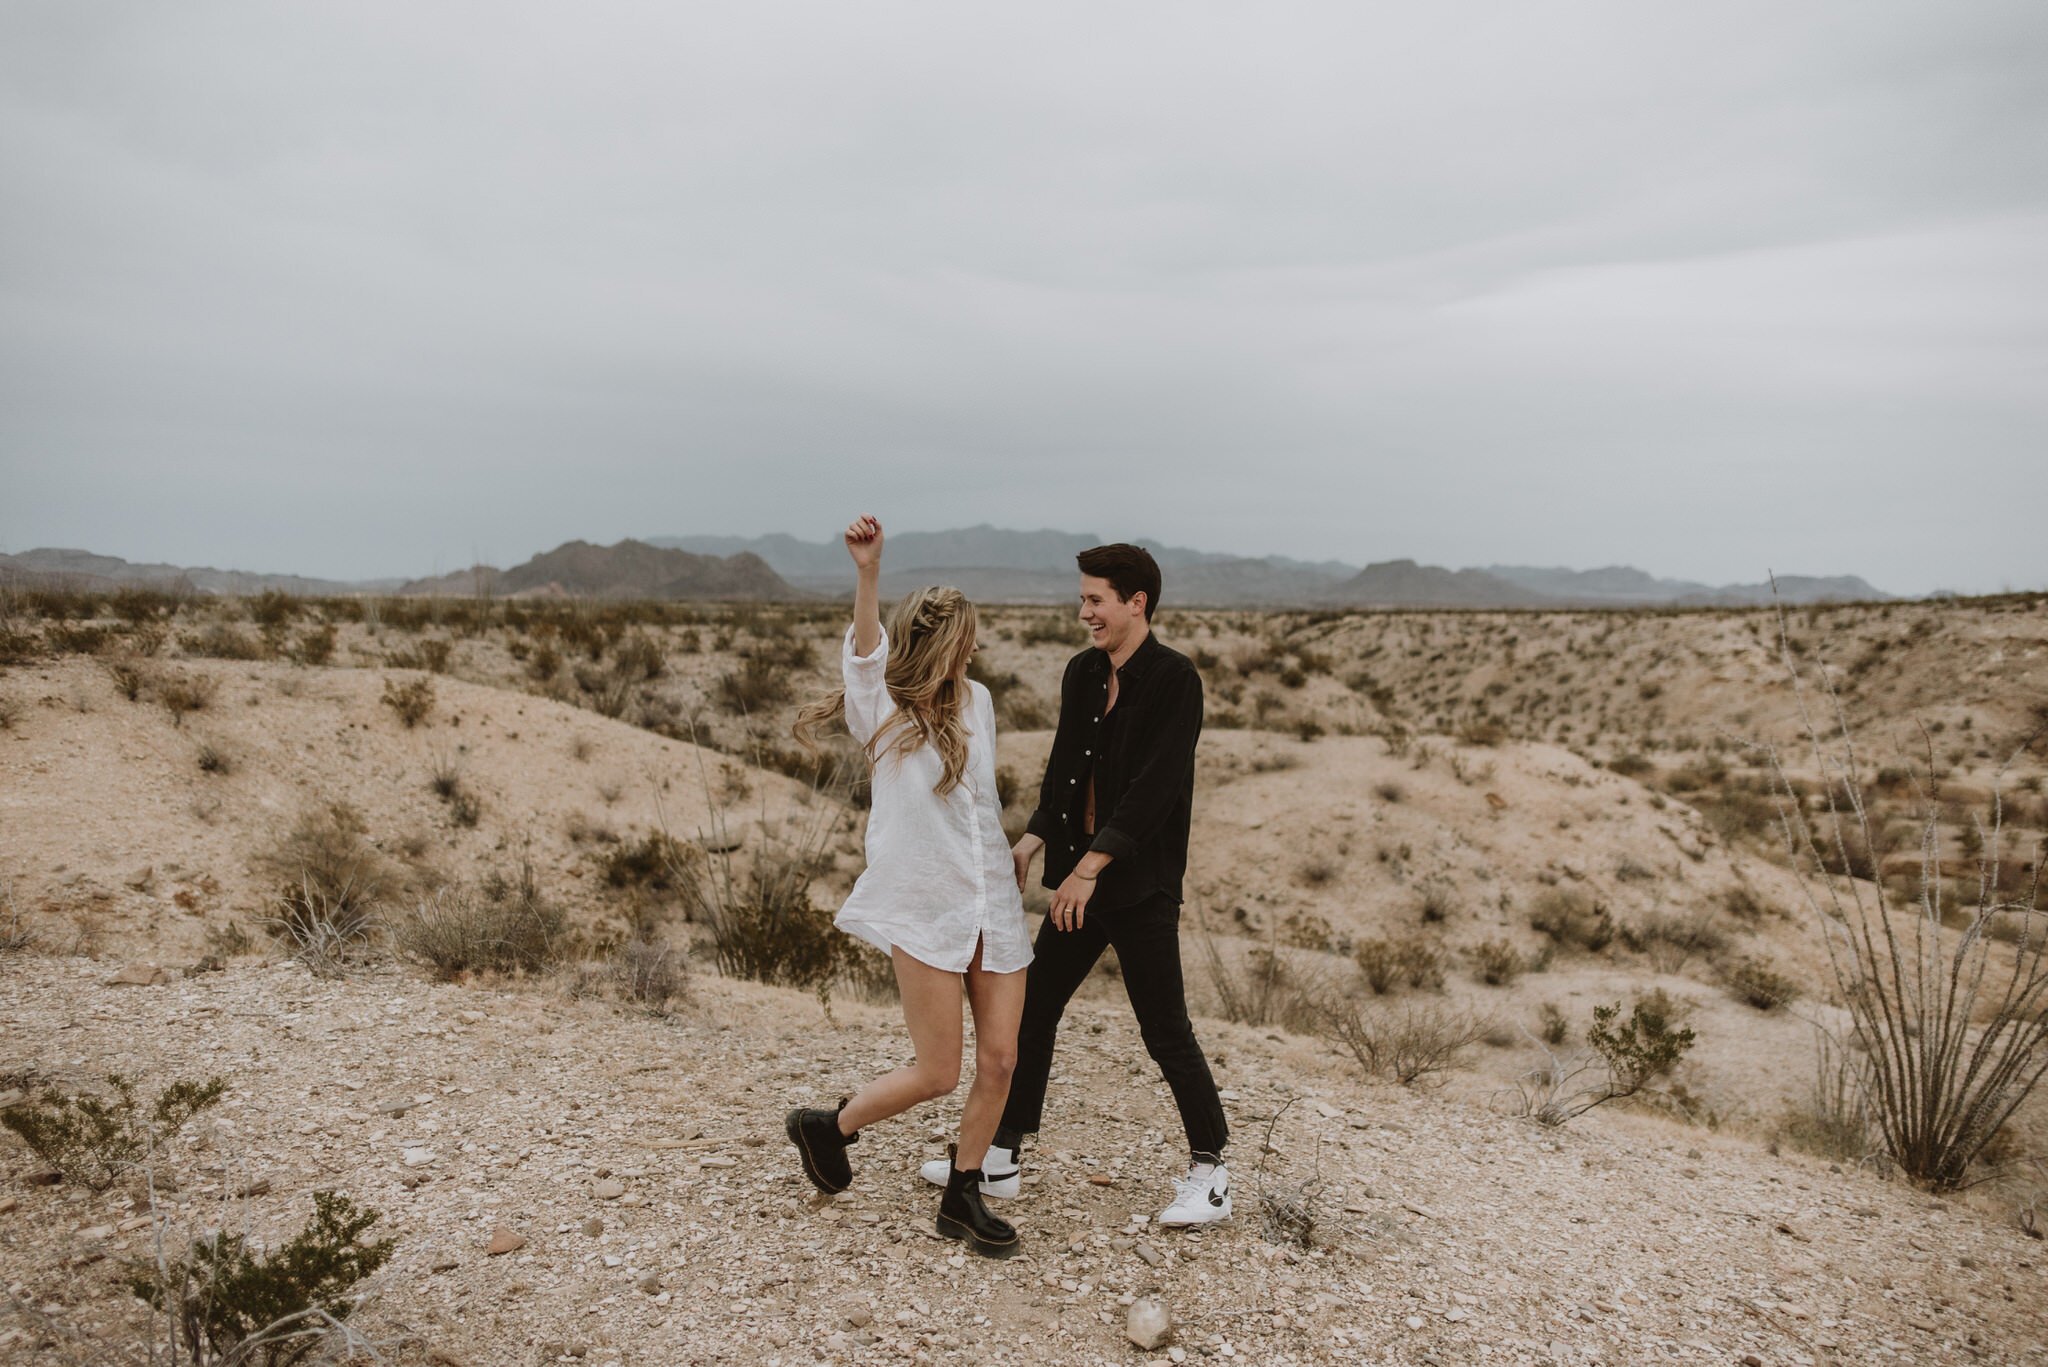 Kaylie-Sirek-Photography-Big-Bend-National-Park-Texas-Engagement-Session-Styled-You-046.jpg